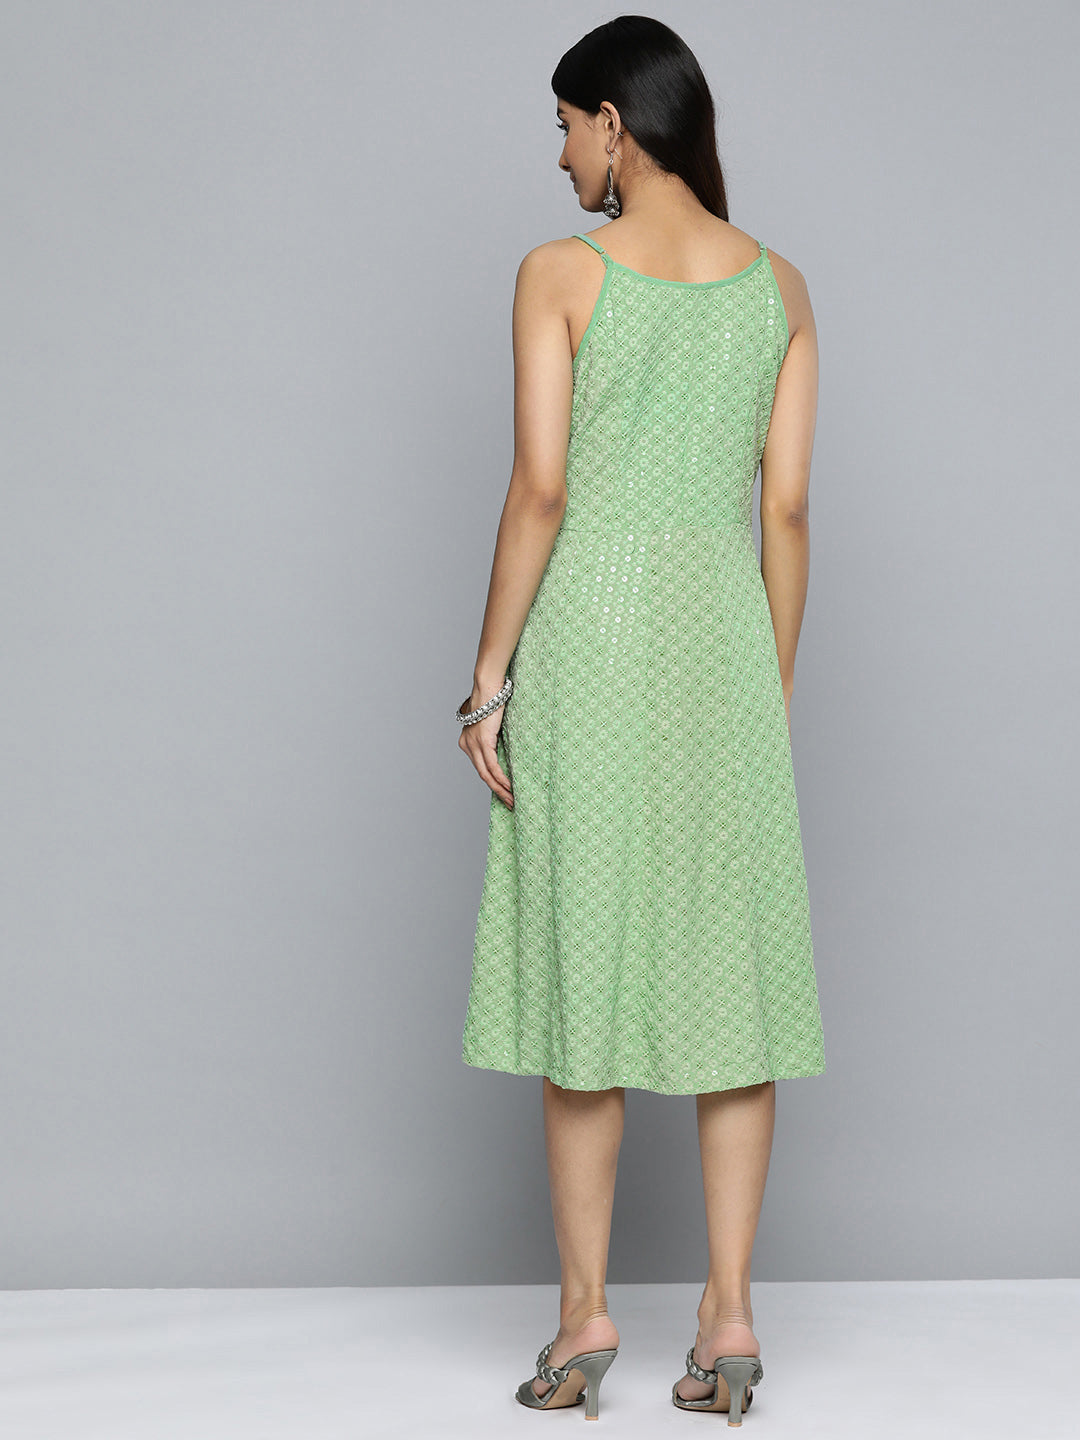 Jompers Green Floral Sequin Embroidered A-Line Midi Dress ( JOK 1494 Pista )